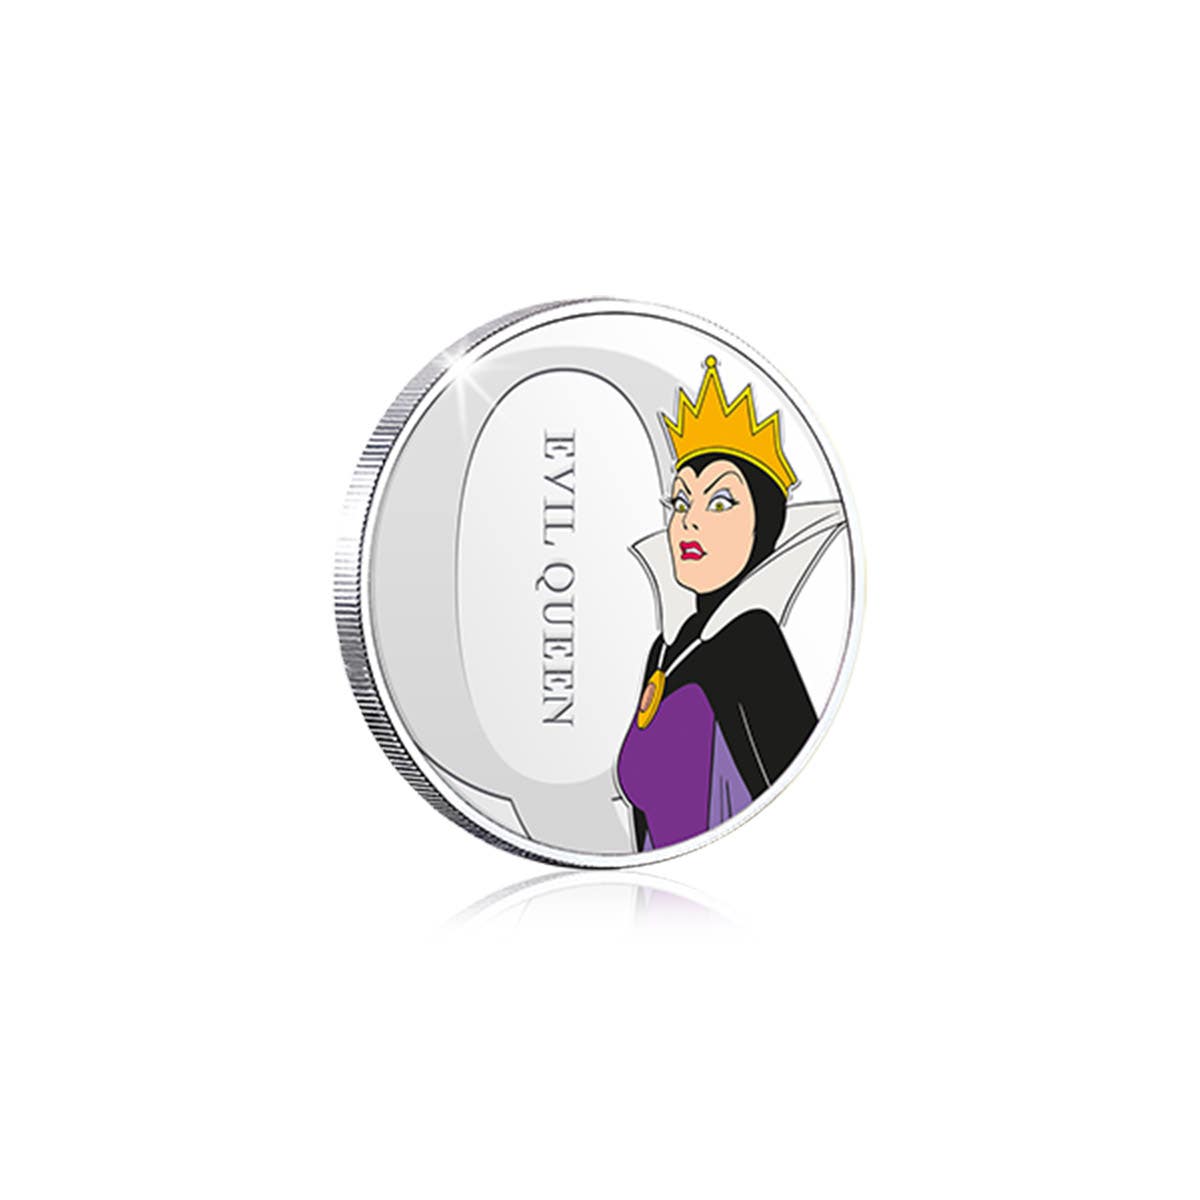 Disney Q is for Evil Queen Silver-Plated Commemorative